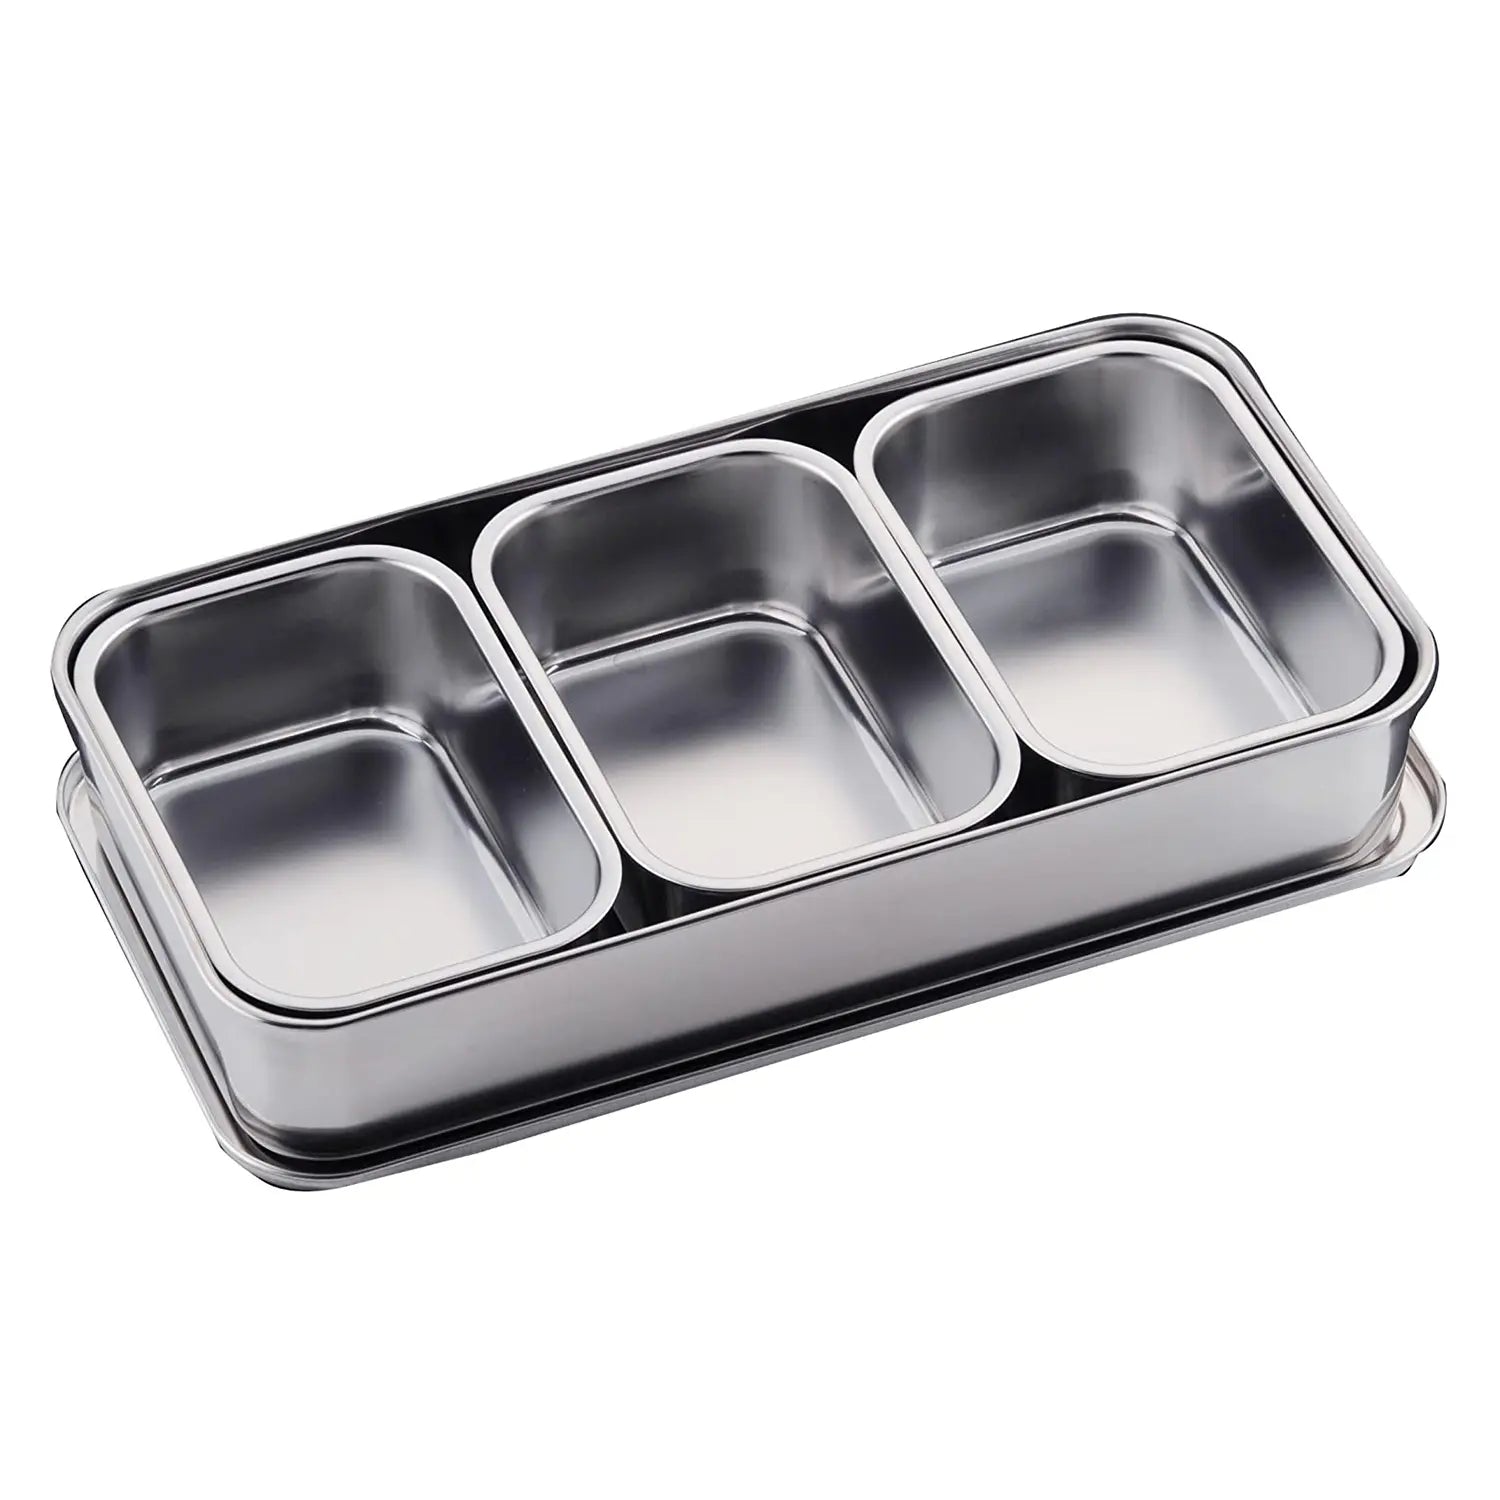 Stainless Yakumi Pan Seasoning Container W/4 Compartments Japan Import